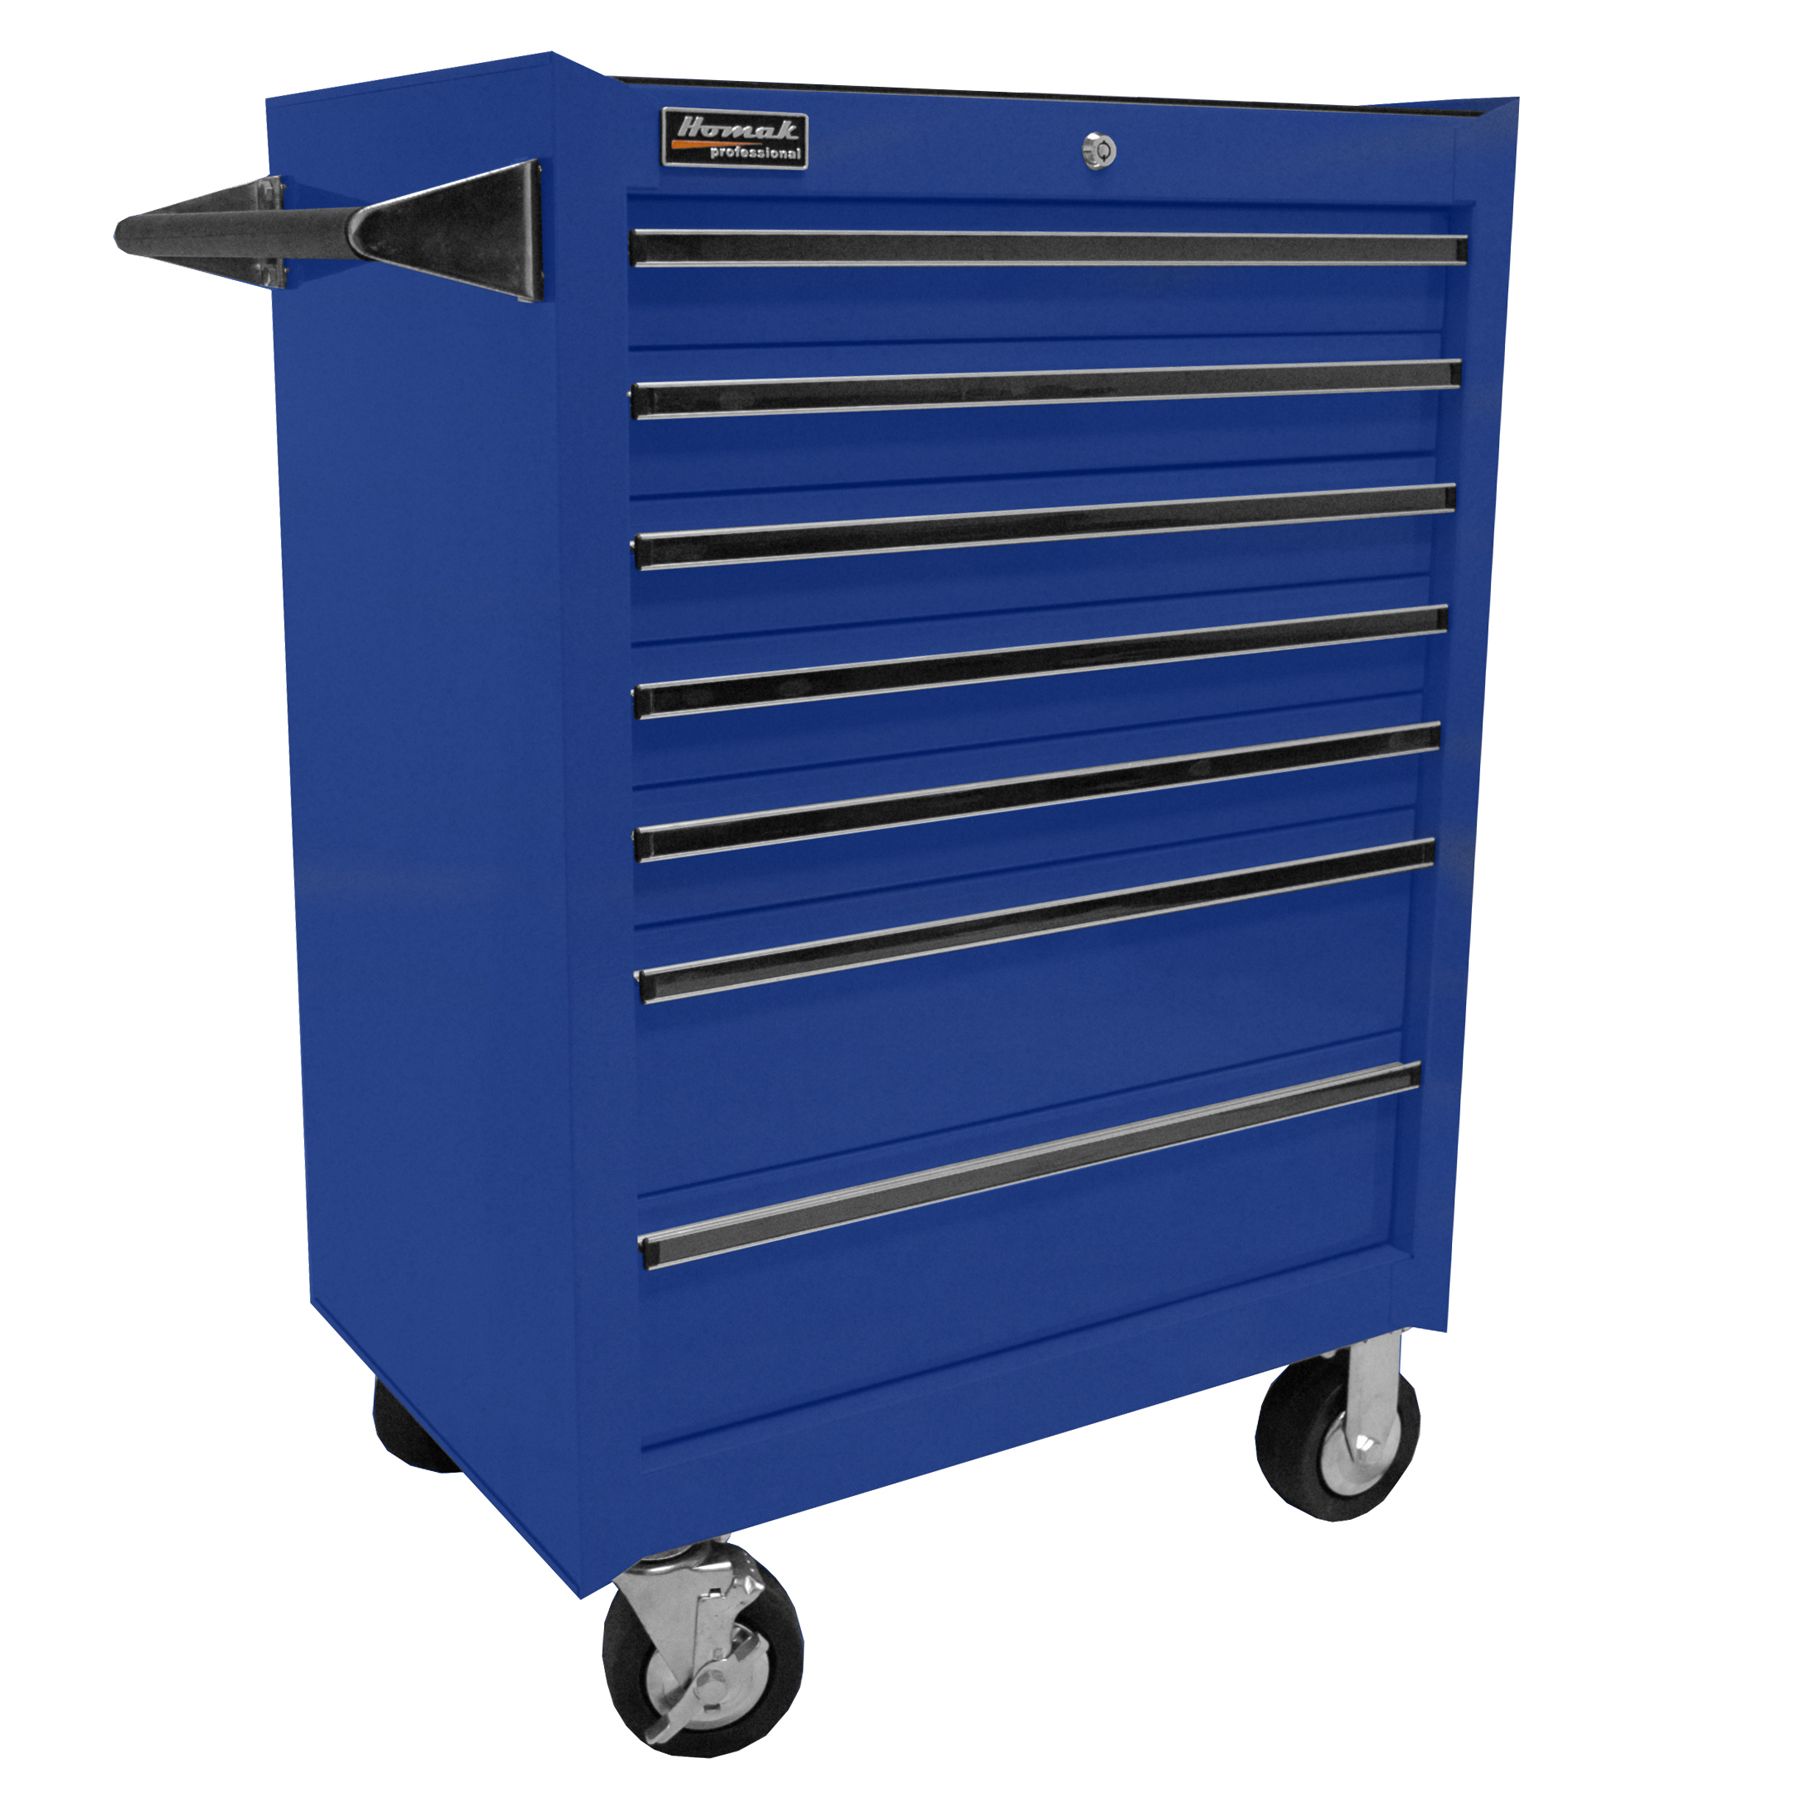 Homak 27 in Professional 7 Drawer Rolling Cabinet - Blue